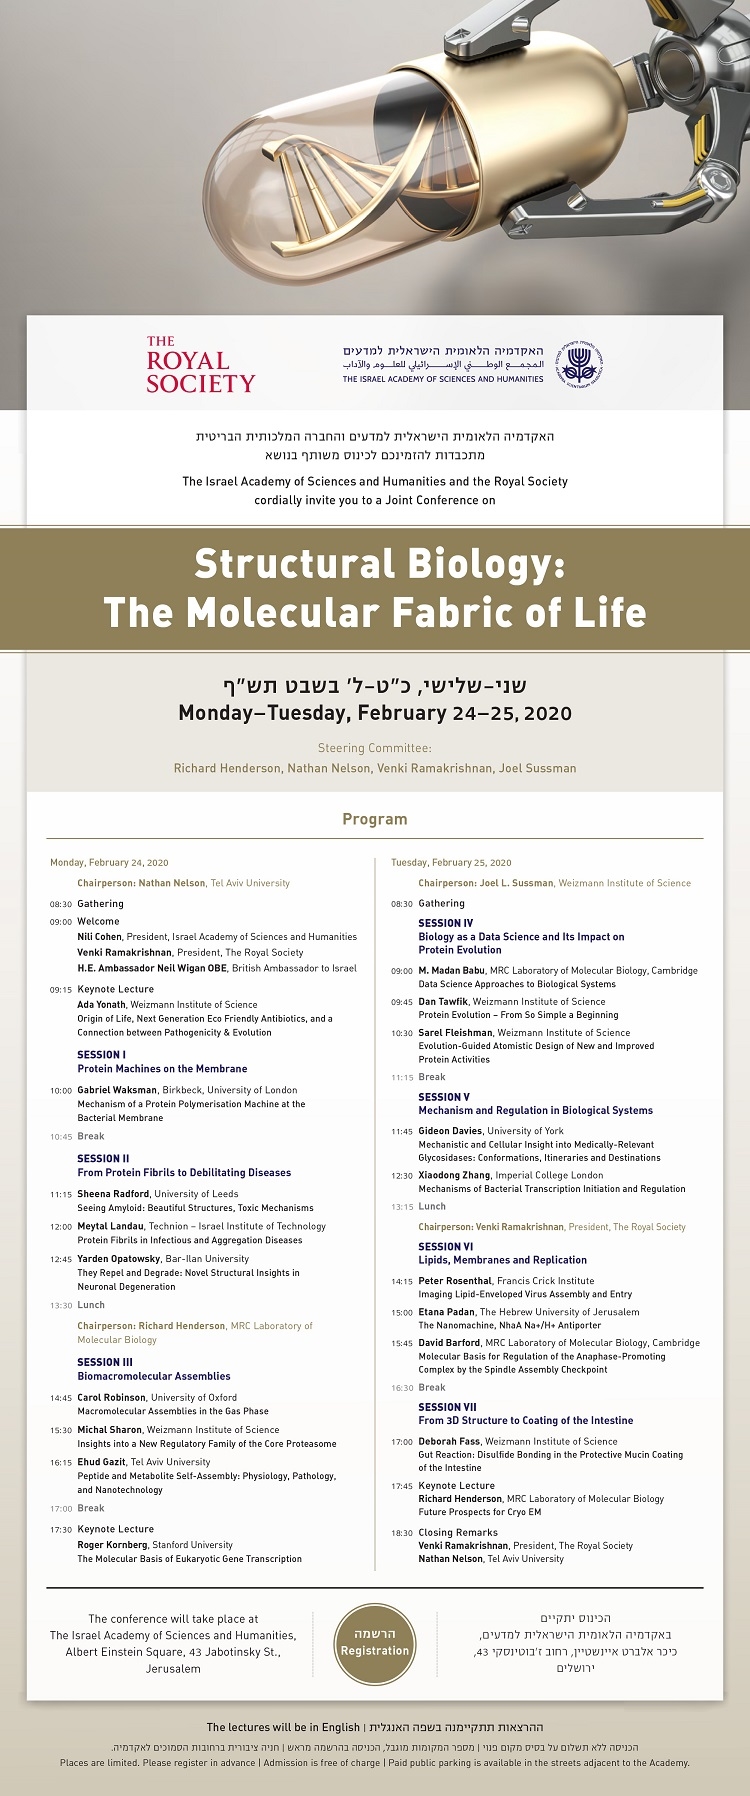 Structural Biology: The Molecular Fabric of Life